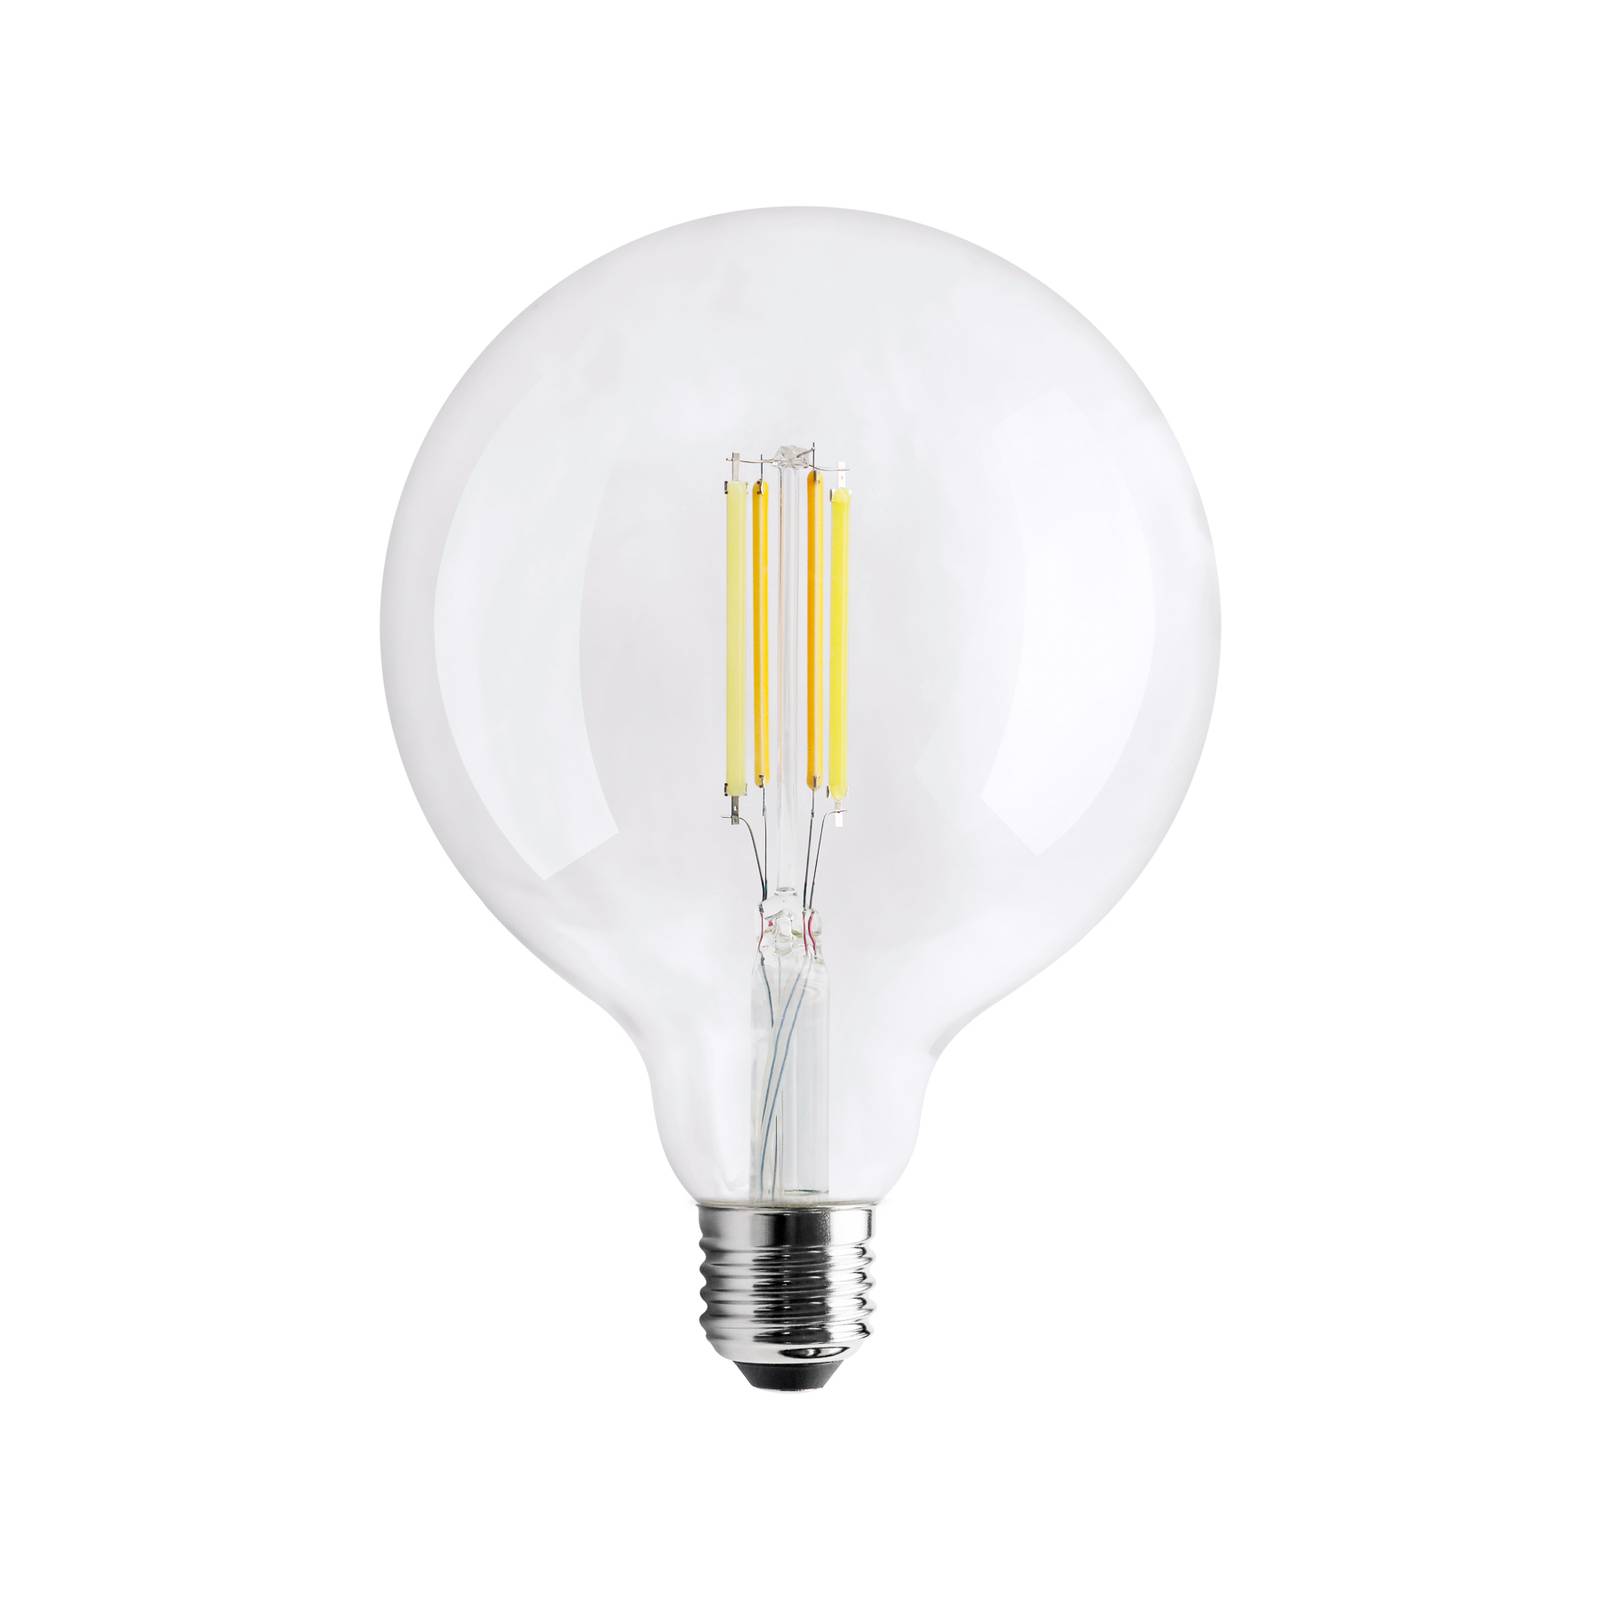 Image of Ampoule LED E27 4,5 W dimmable CCT Tuya Ø 12,5 cm 4251911747553